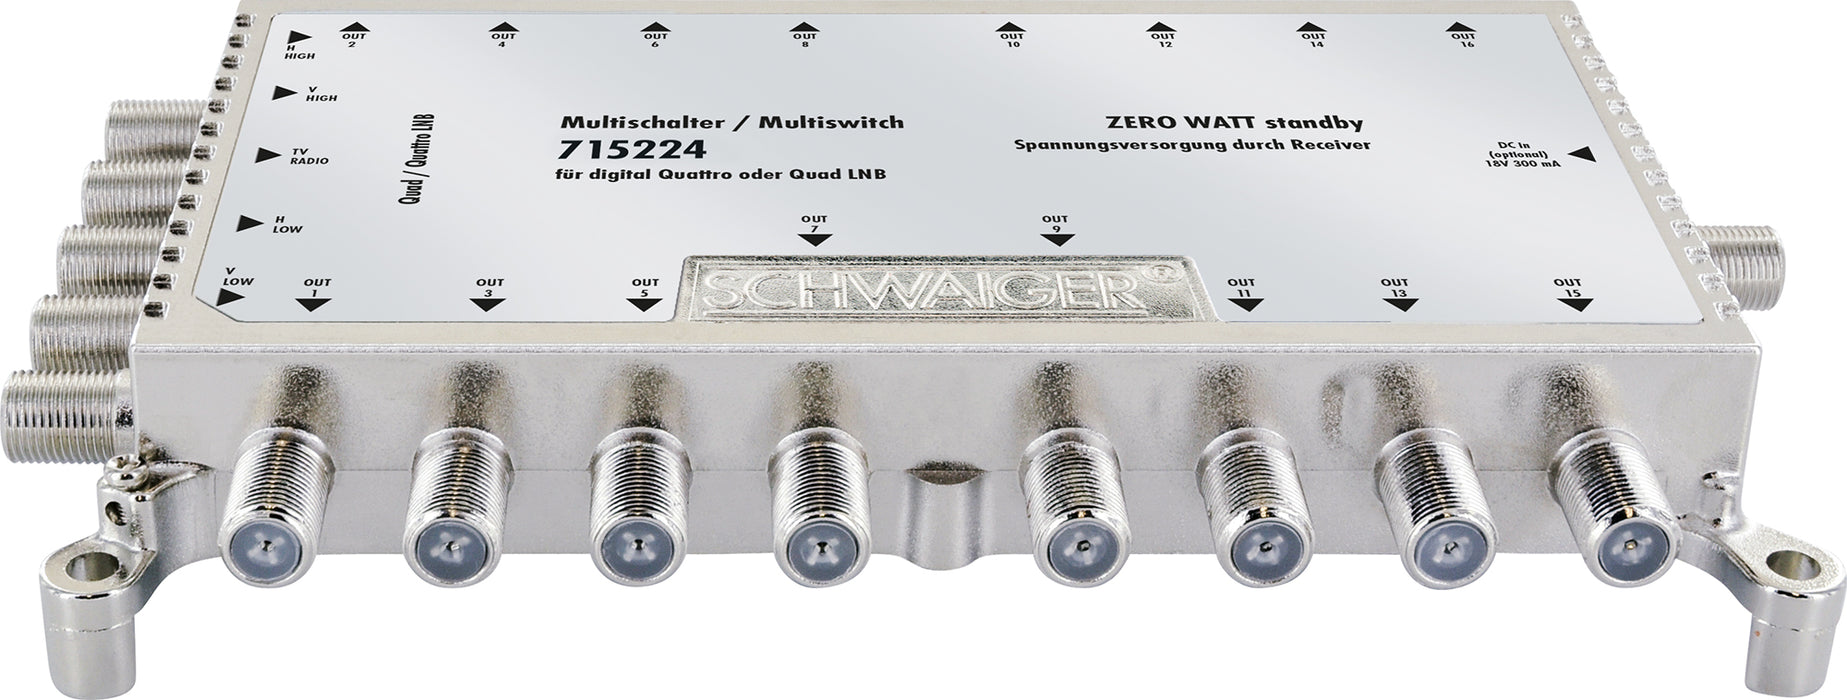 SAT multiswitch 5x16 set with power supply